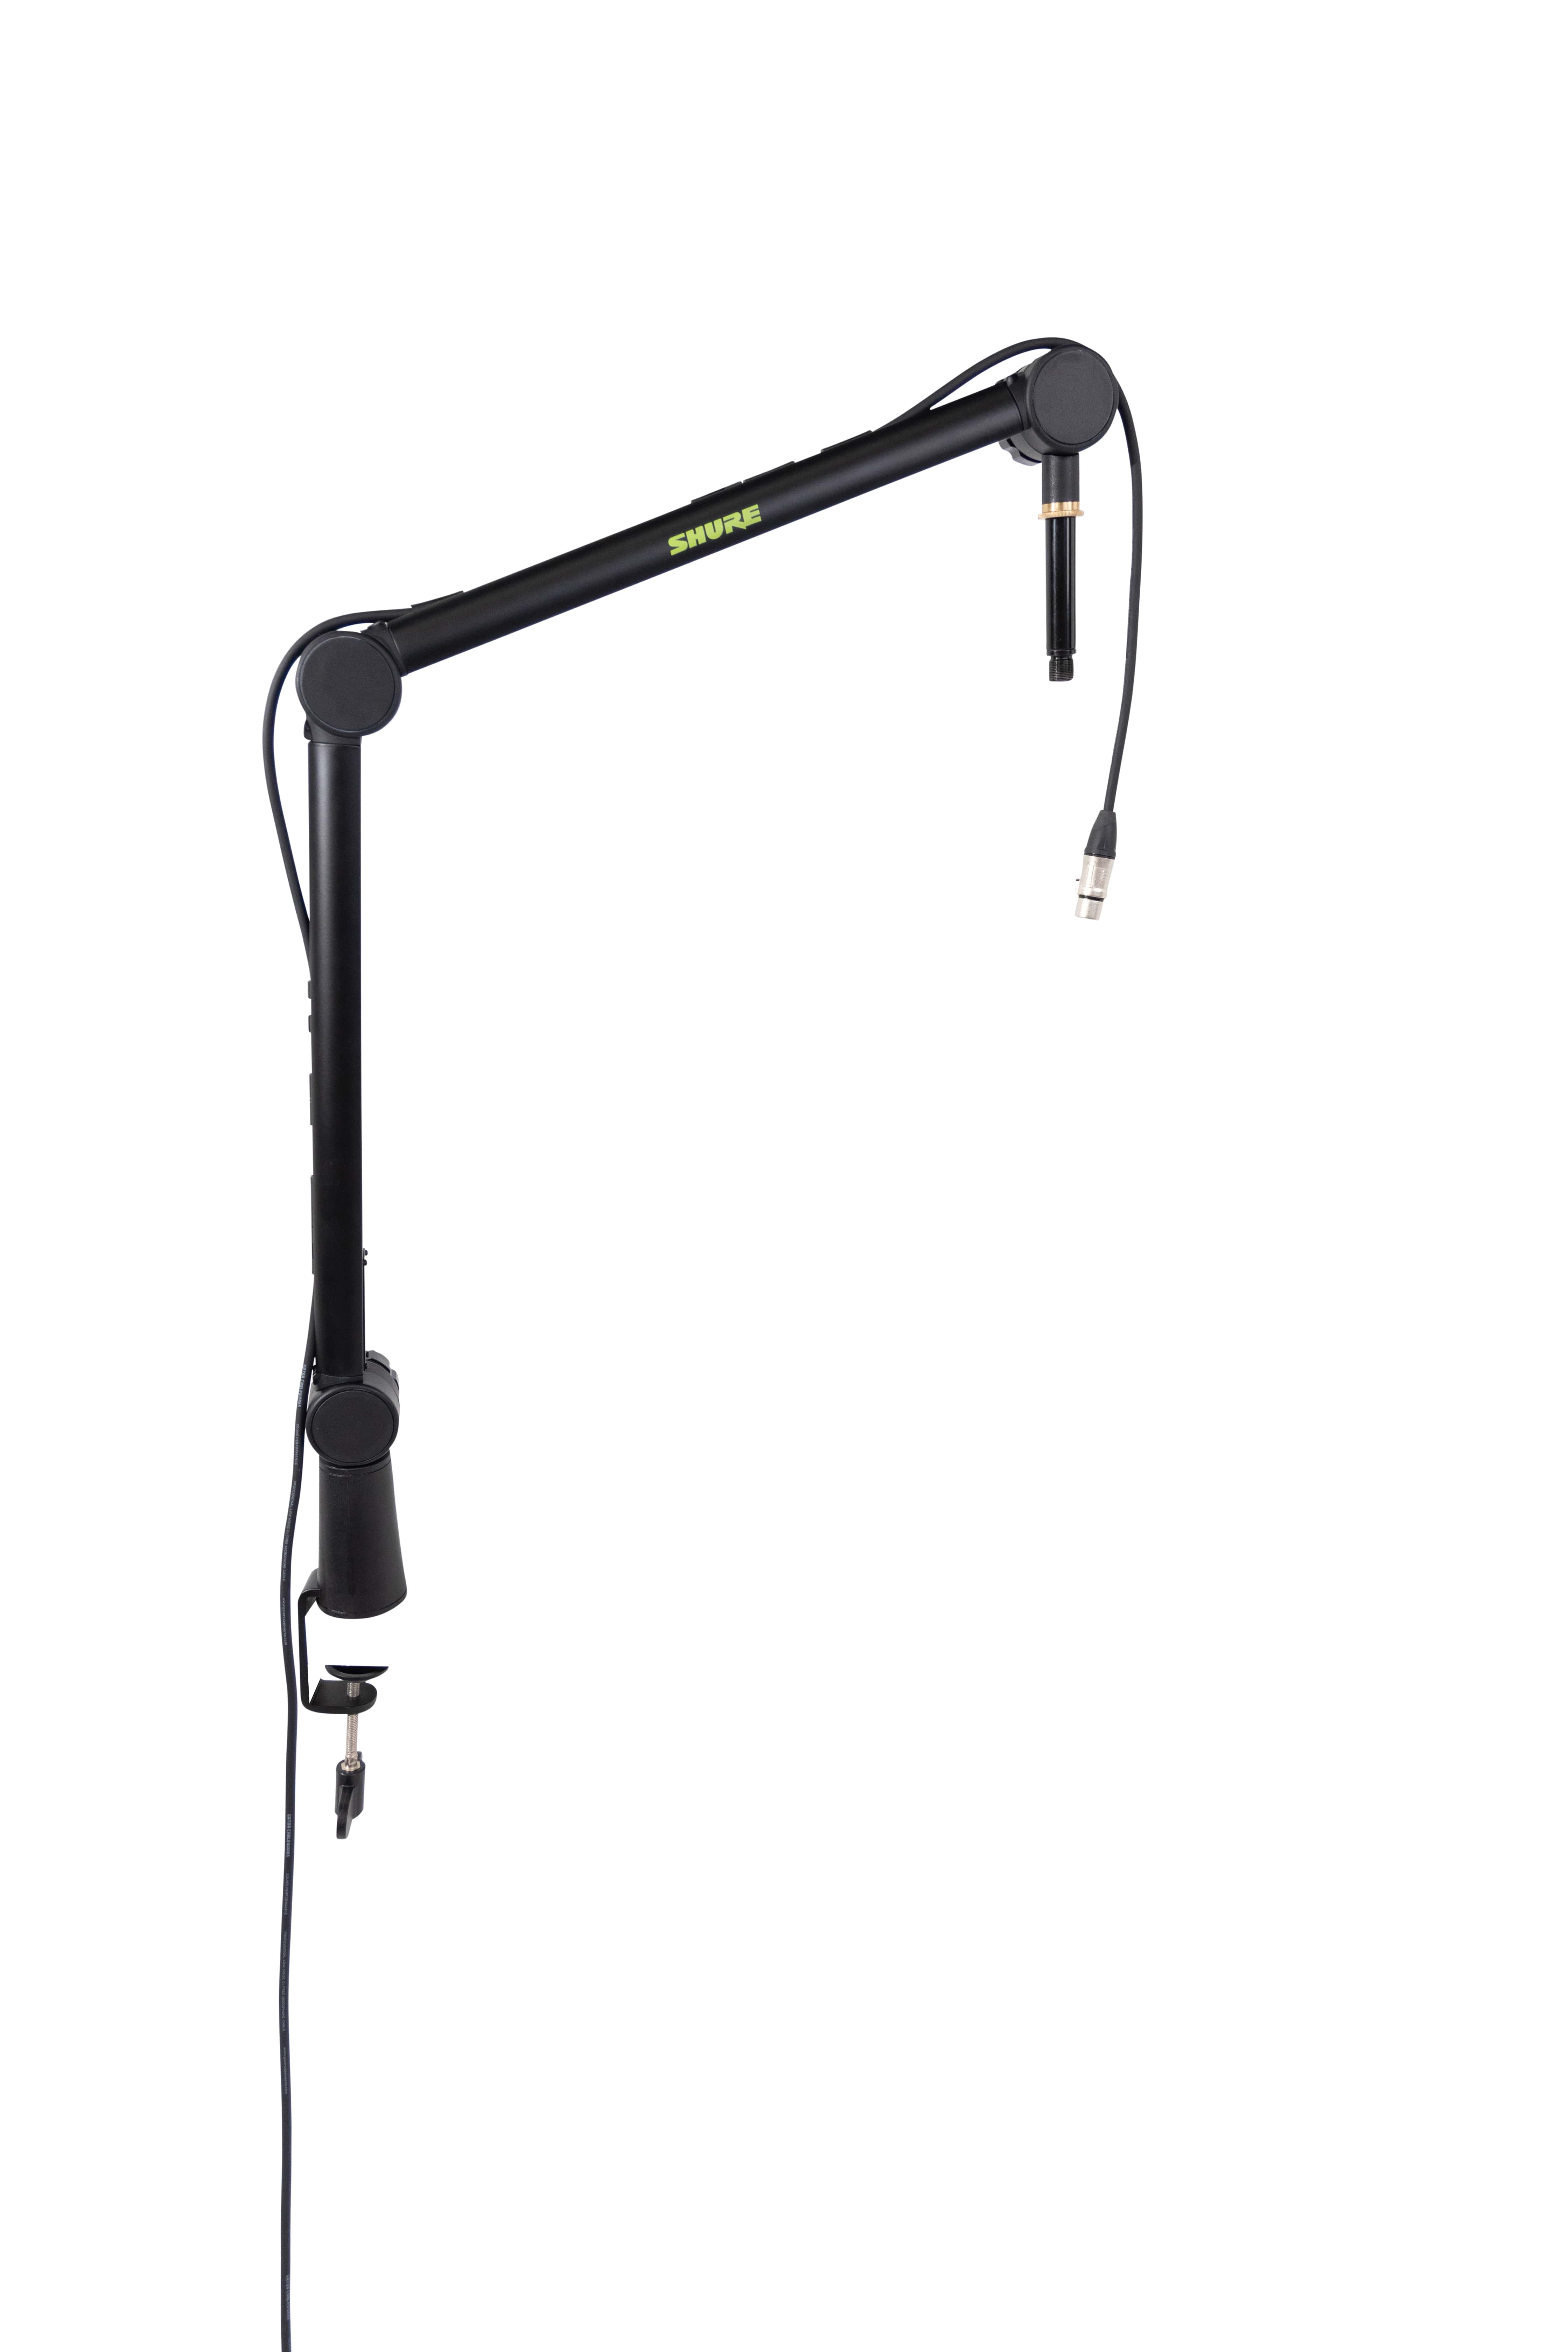 Gator Frameworks Bras Articule A Pince Deluxe Pour Micro - Microphone stand - Variation 14